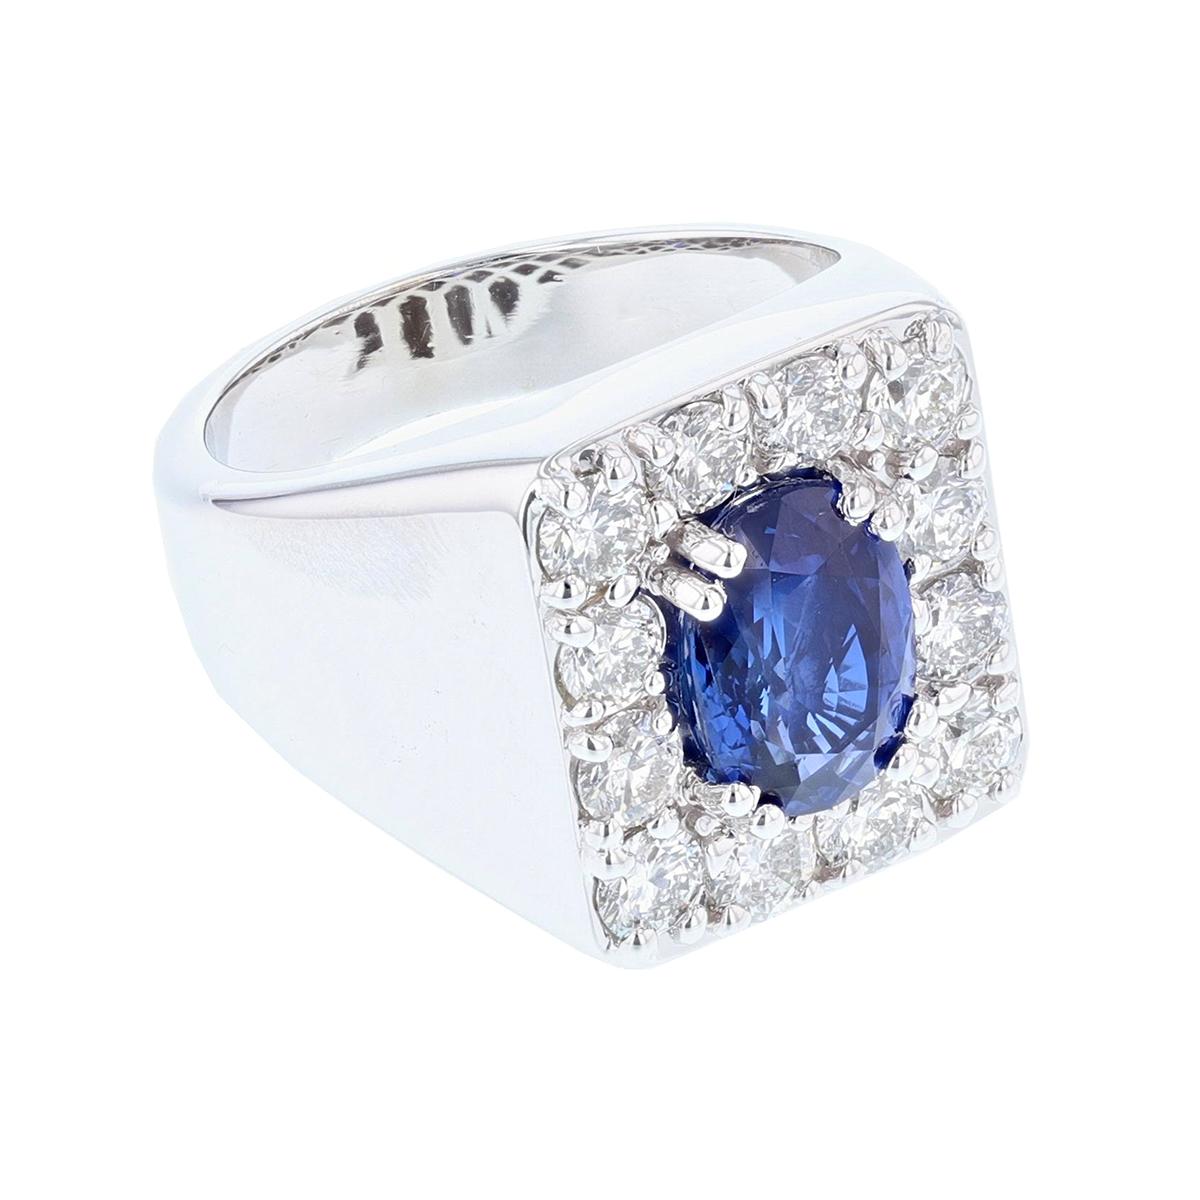 This gent's ring is made in 14 karat white gold featuring one oval cut, GIA certified, Natural Blue Madagascar Sapphire weighing 4.05 ct that is prong set. The certificate number is GIA 2205469285. The ring features 12 round cut diamonds, prong set